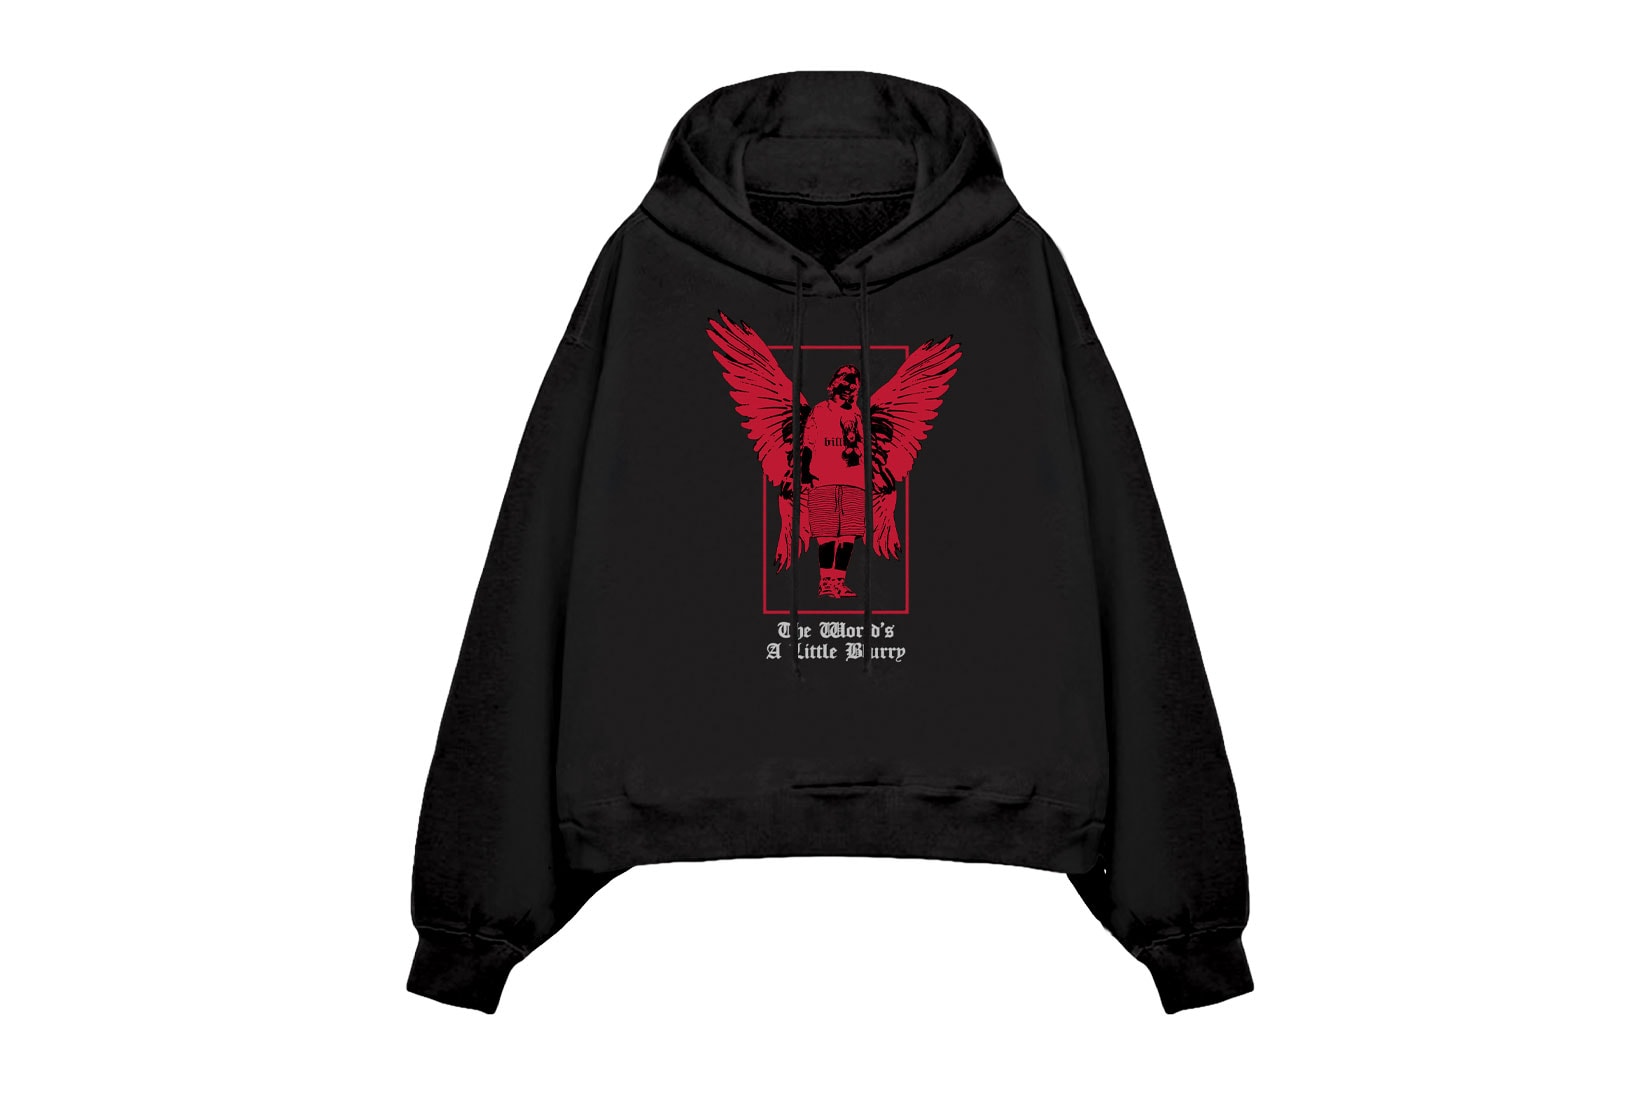 billie eilish blohsh merch the worlds a little blurry documentary collection hoodies black red hoodie